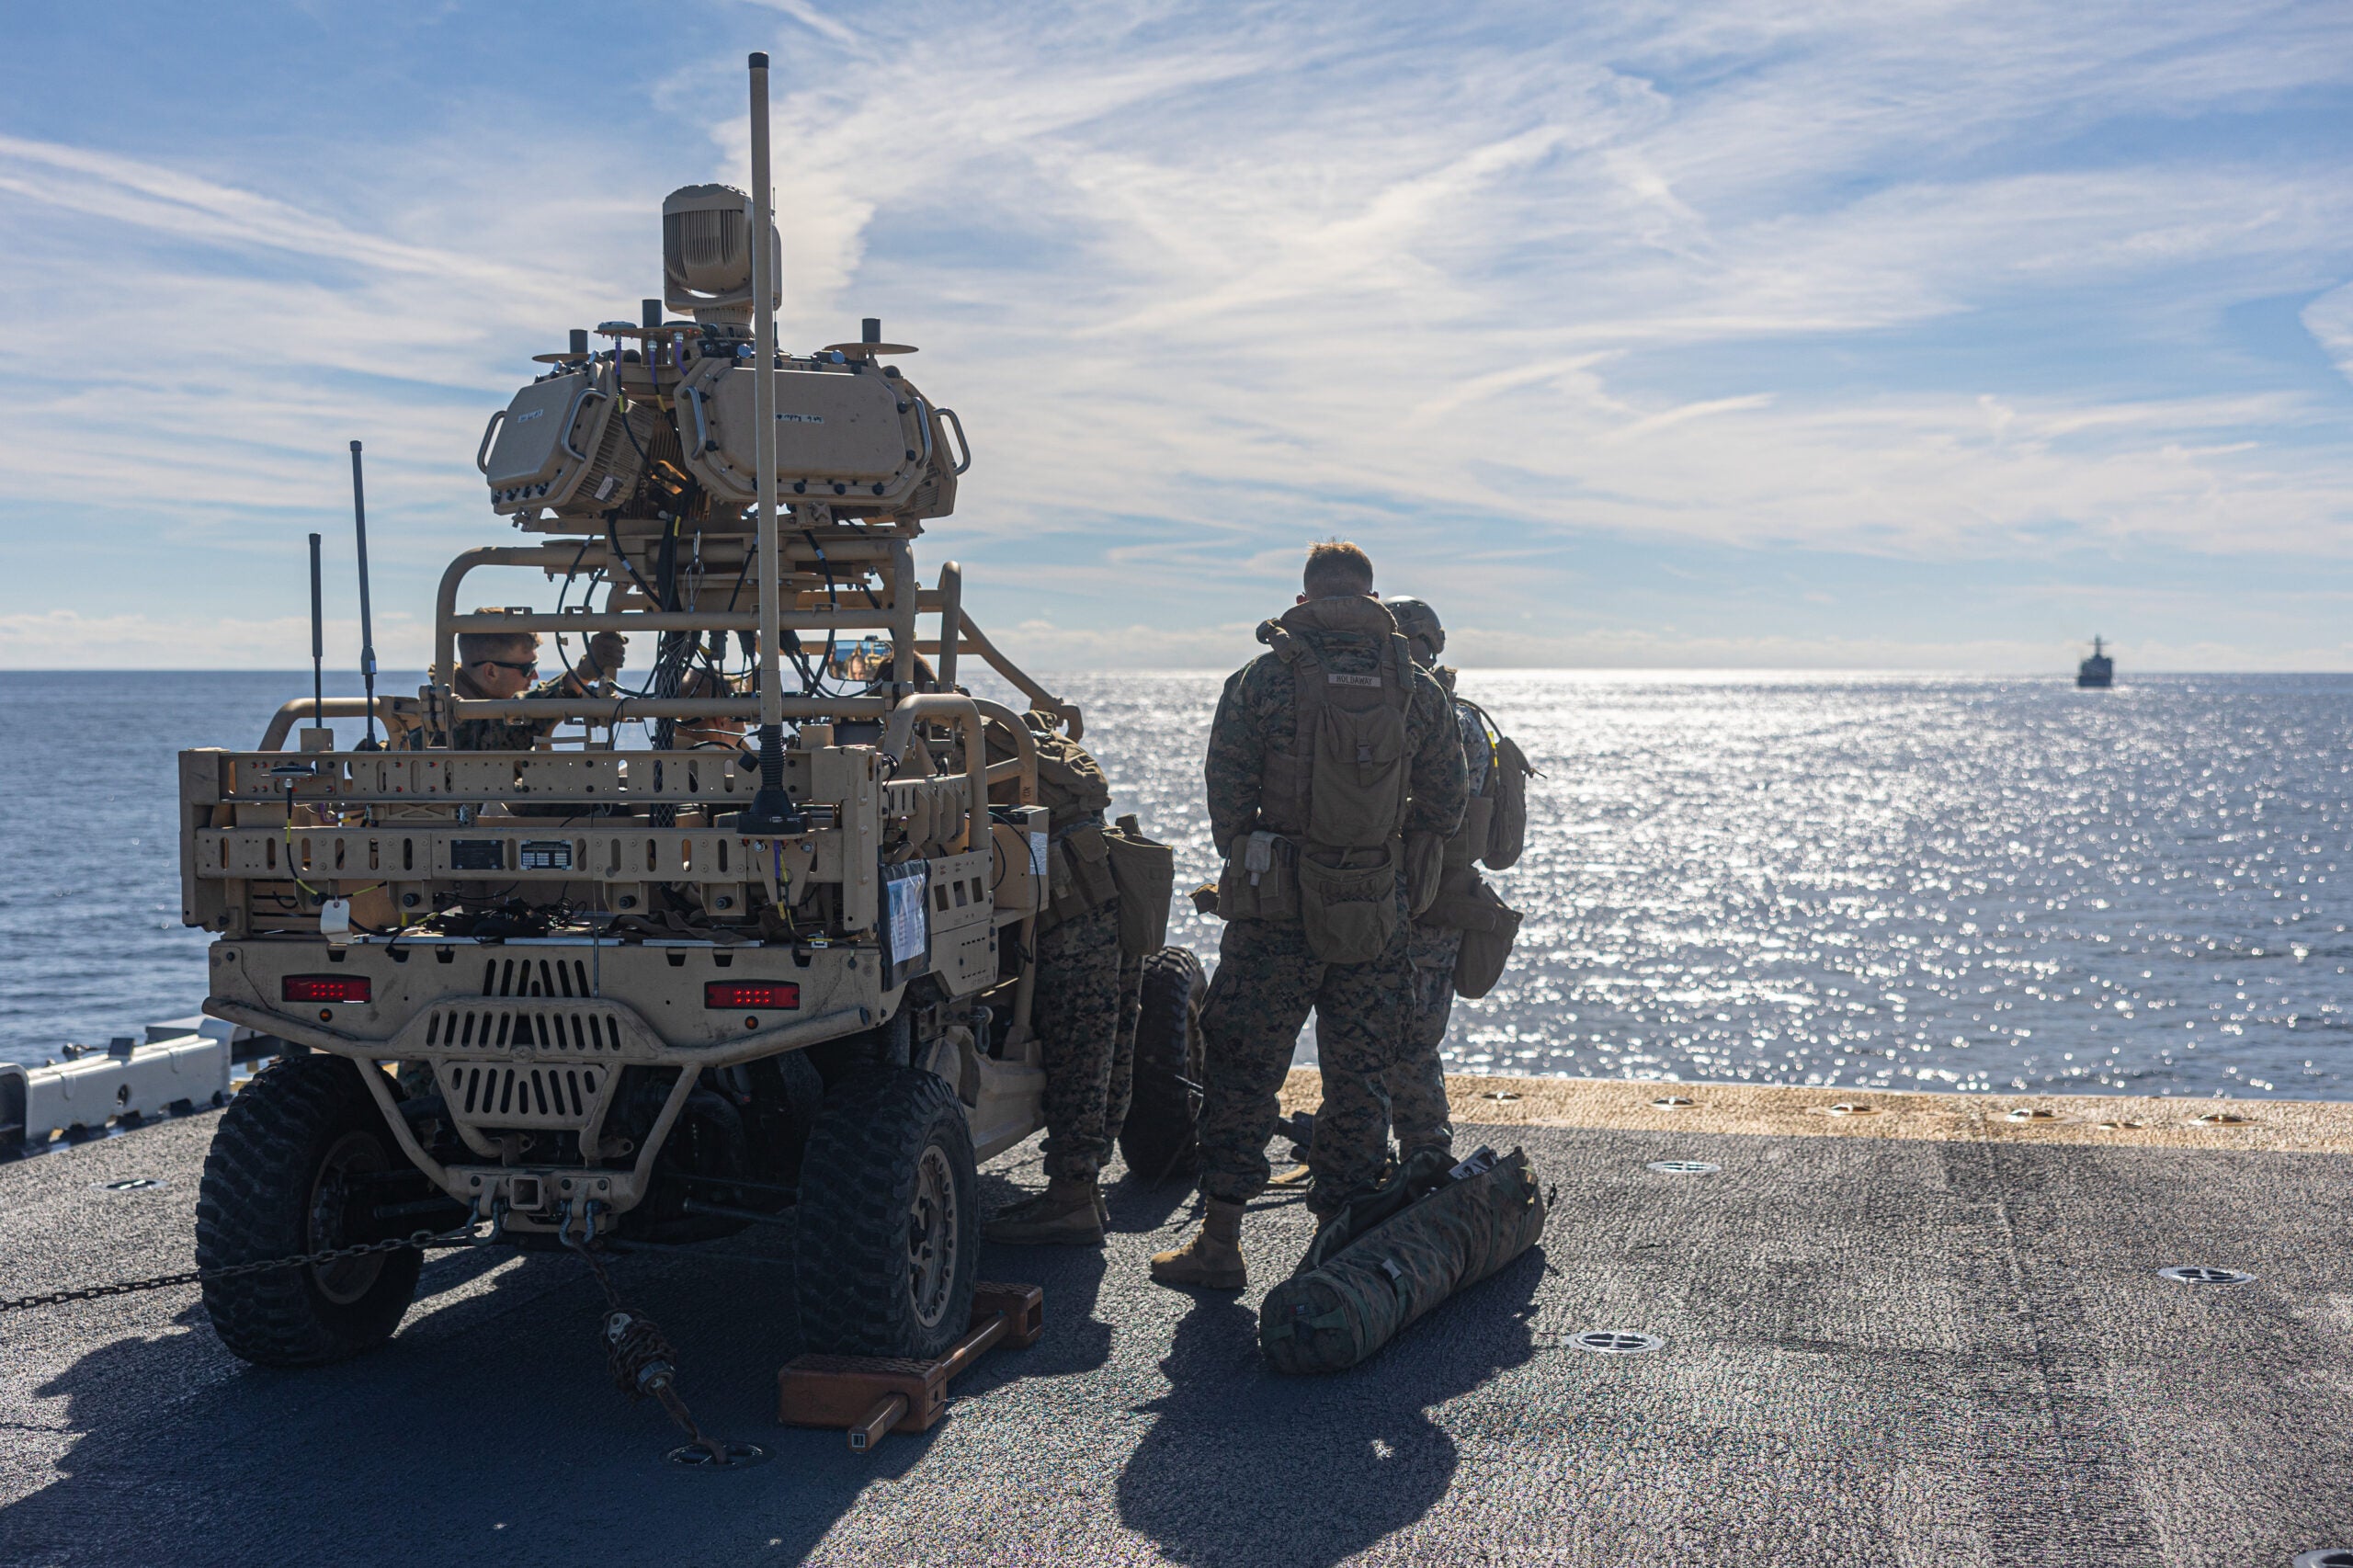 U.S. Marines with the 26th Marine Expeditionary Unit (MEU), track a simulated adversary vessel using the Light Marine Air Defense Integrated System (L-MADIS), and a Counter Unmanned Aerial Surveillance Utility Task Vehicle, during a defense of the amphibious task force (DATF) drill aboard the Wasp-Class Amphibious Assault Ship USS Bataan (LHD 5) Jan. 28, 2023. During PMINT, the 26th MEU embarked the L-MADIS, which is the only counter unmanned aircraft system on the east coast organic to the Marine Corps, which can be employed expeditiously on ship and on land in order to protect high value assets and personnel. The DATF drill positioned Marines and Sailors to augment and reinforce the ship's security posture while crossing a simulated strait. (U.S. Marine Corps photo by Cpl. Matthew Romonoyske-Bean)